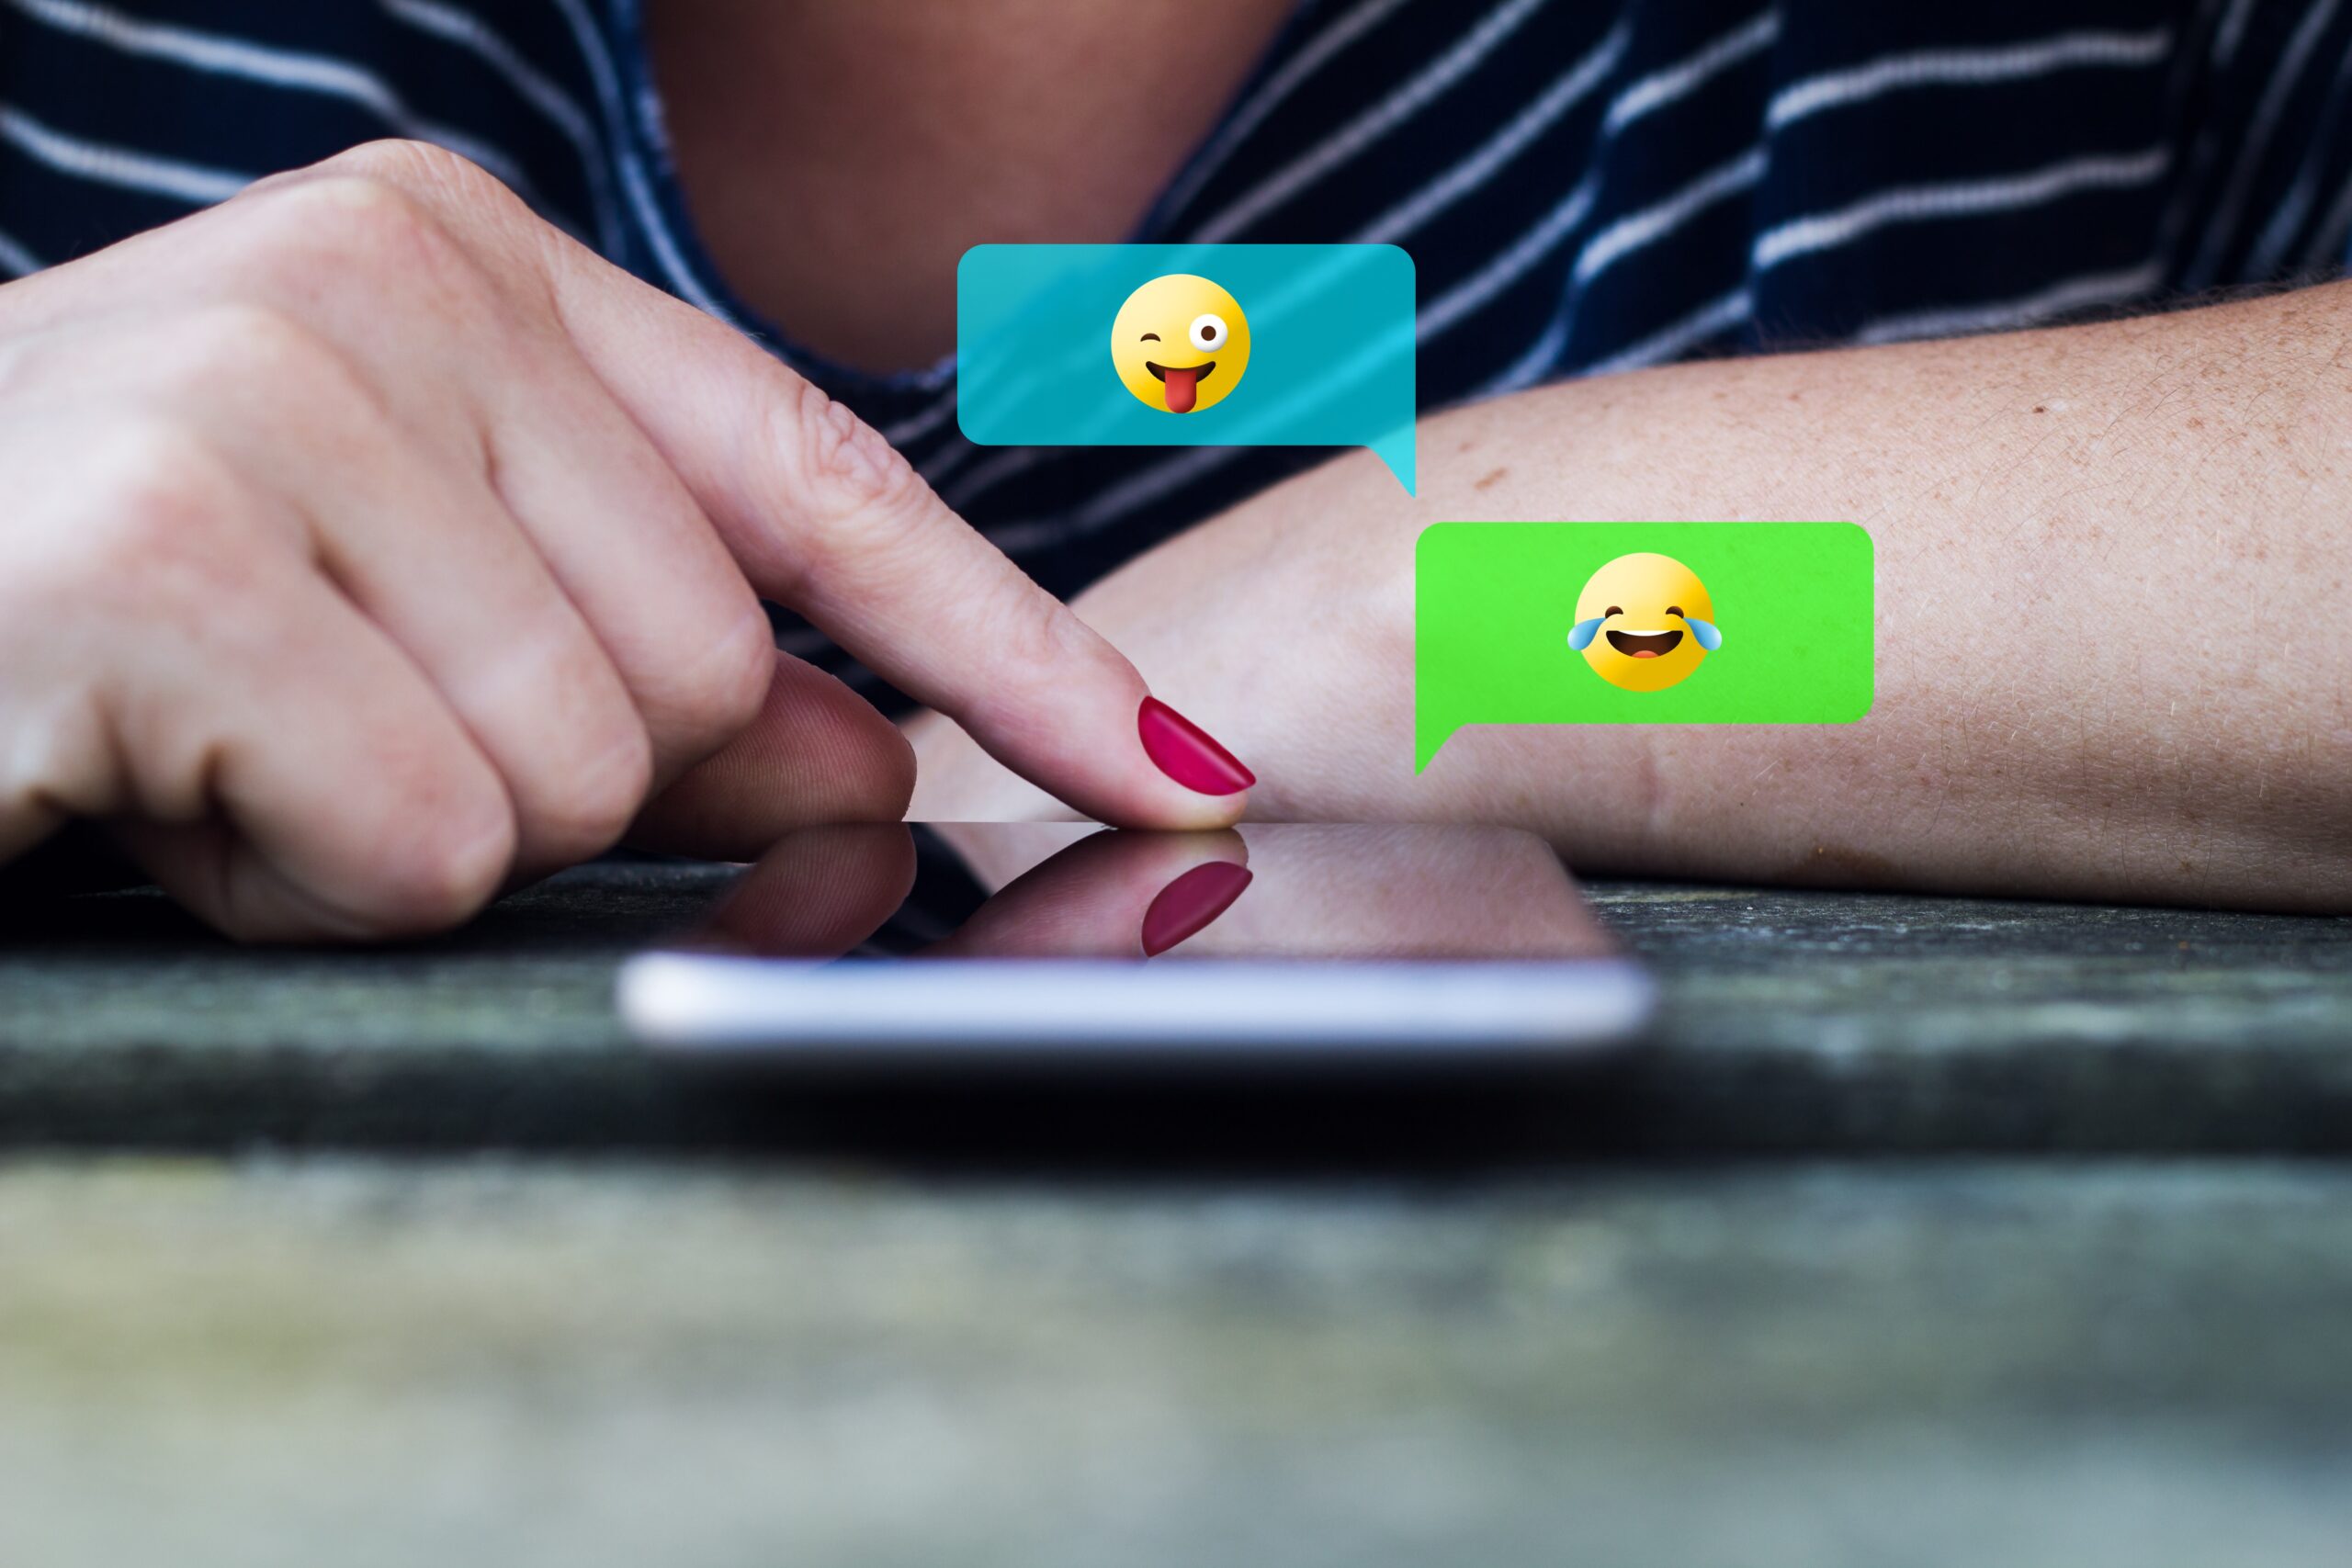 Text message conversation of emoji back and forth